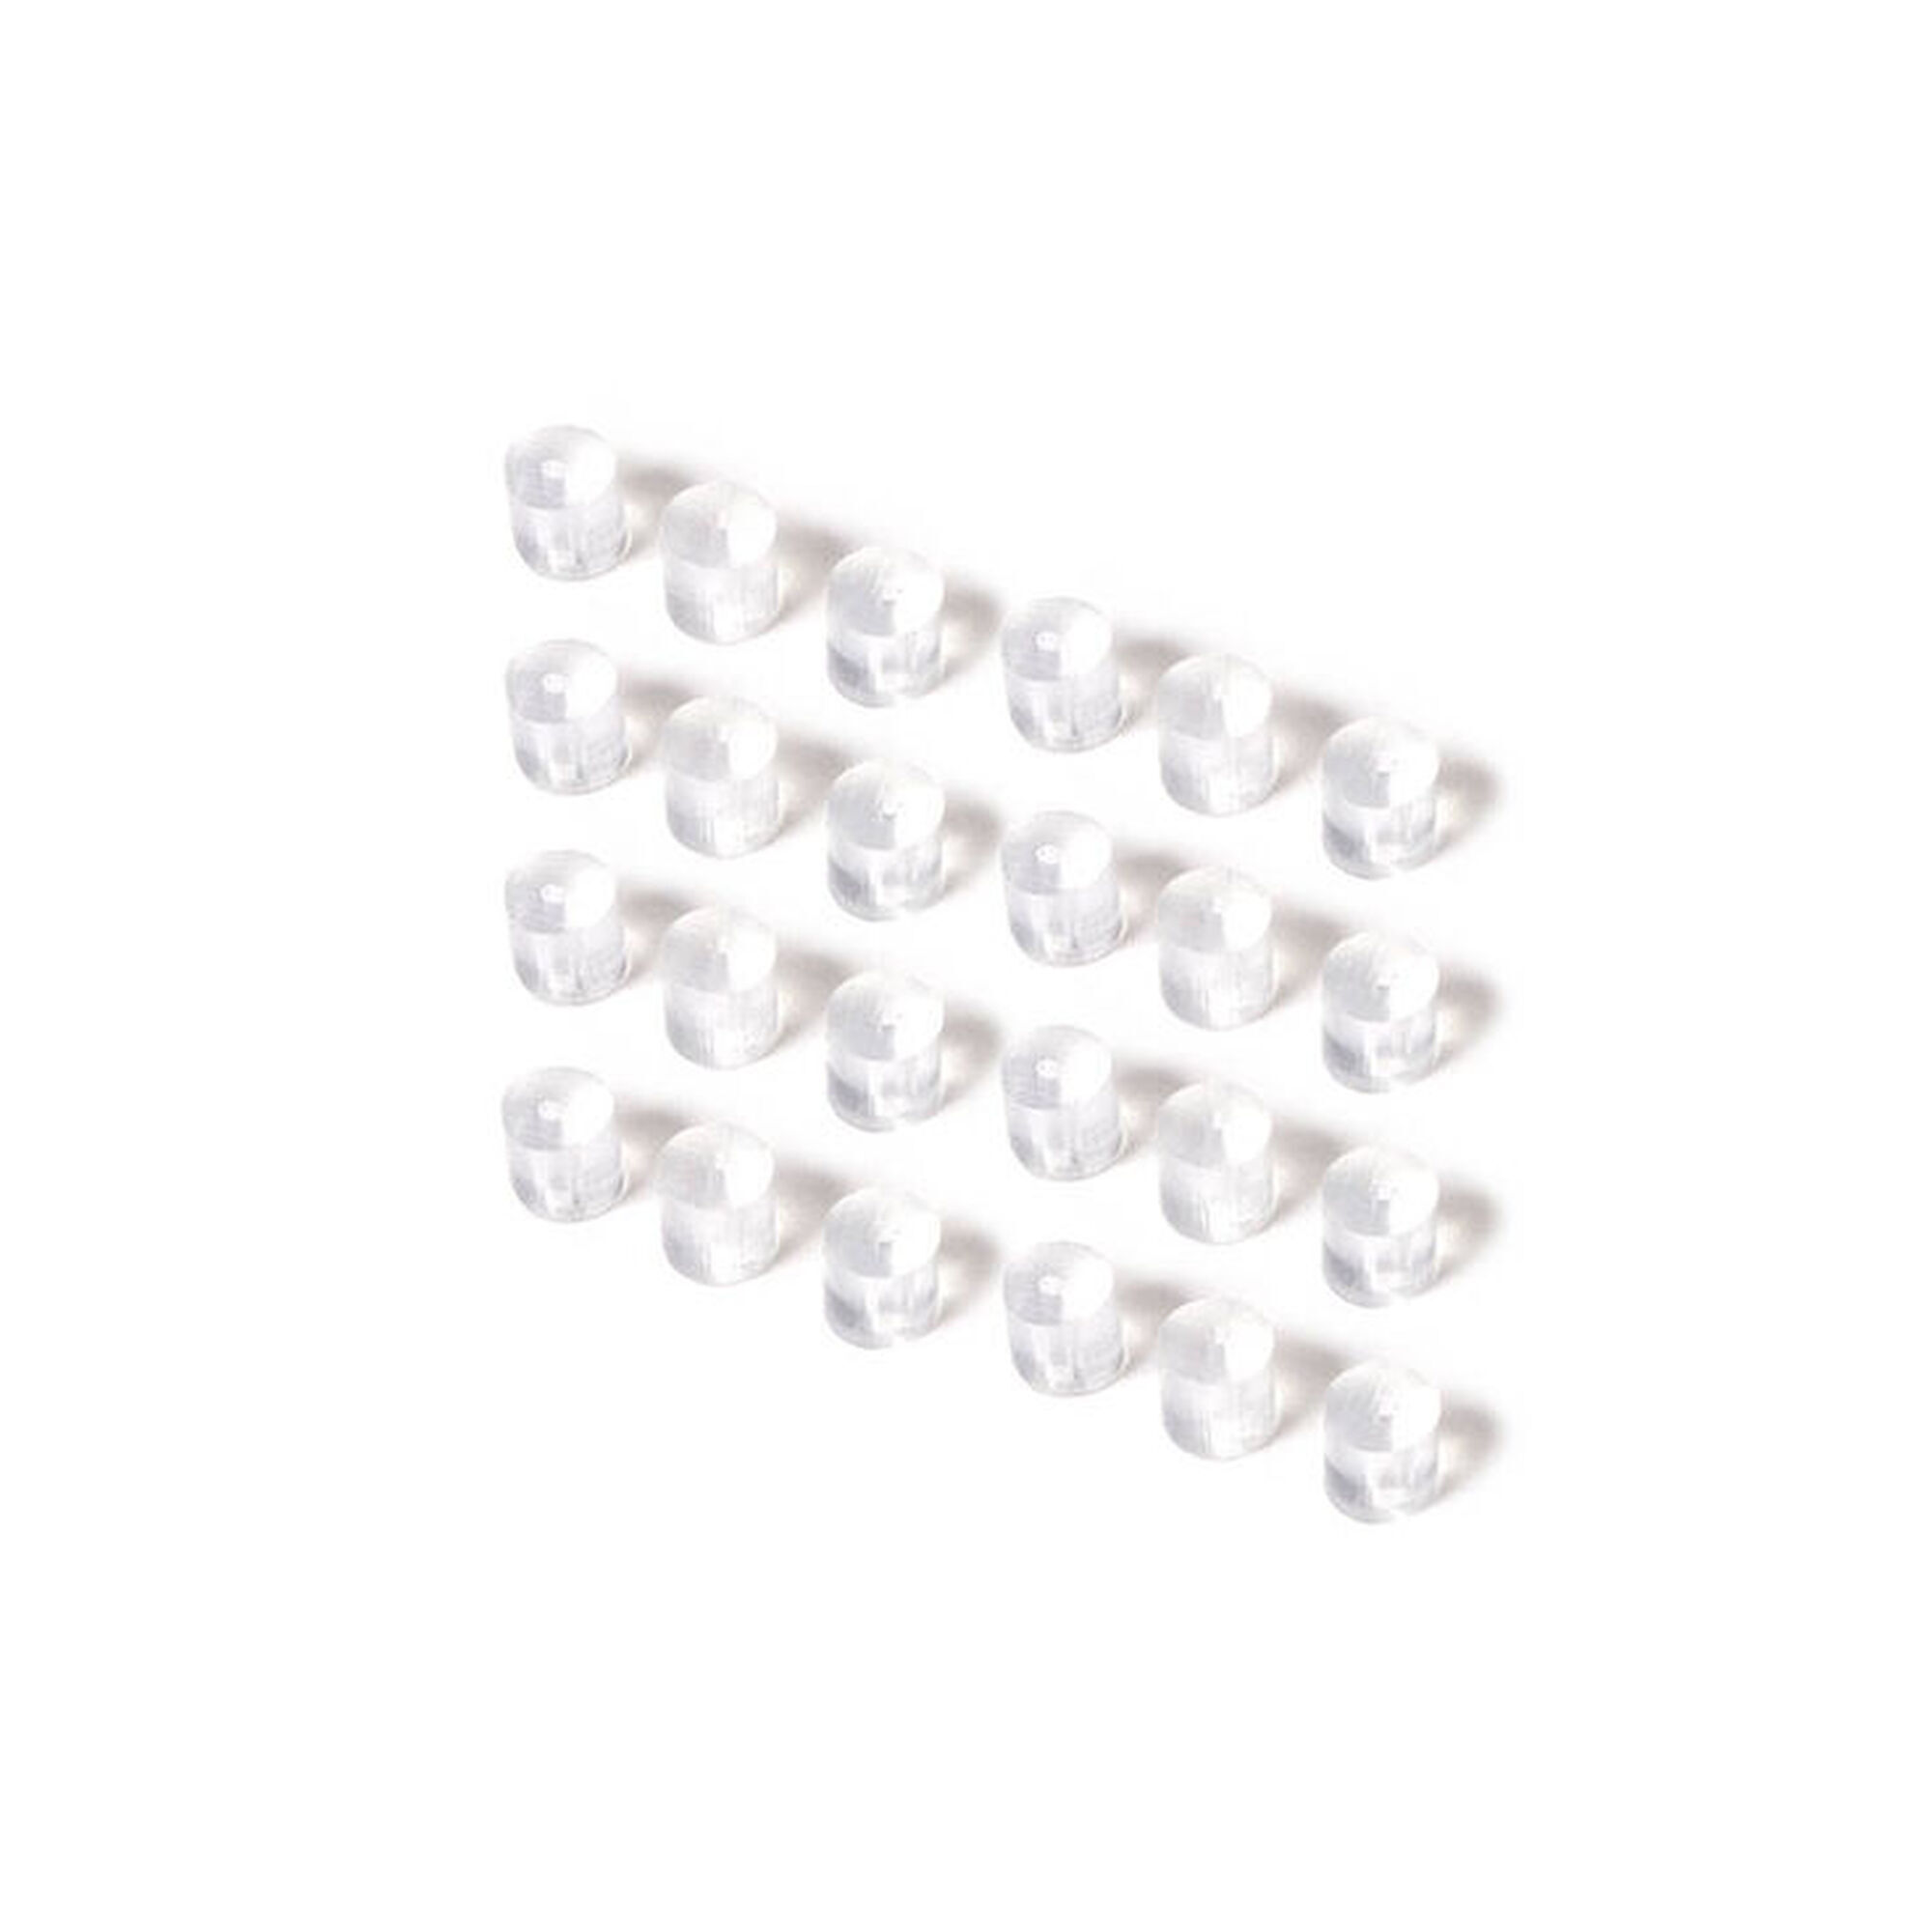 View Claires Fish Hook Earring Stoppers 12 Pack information